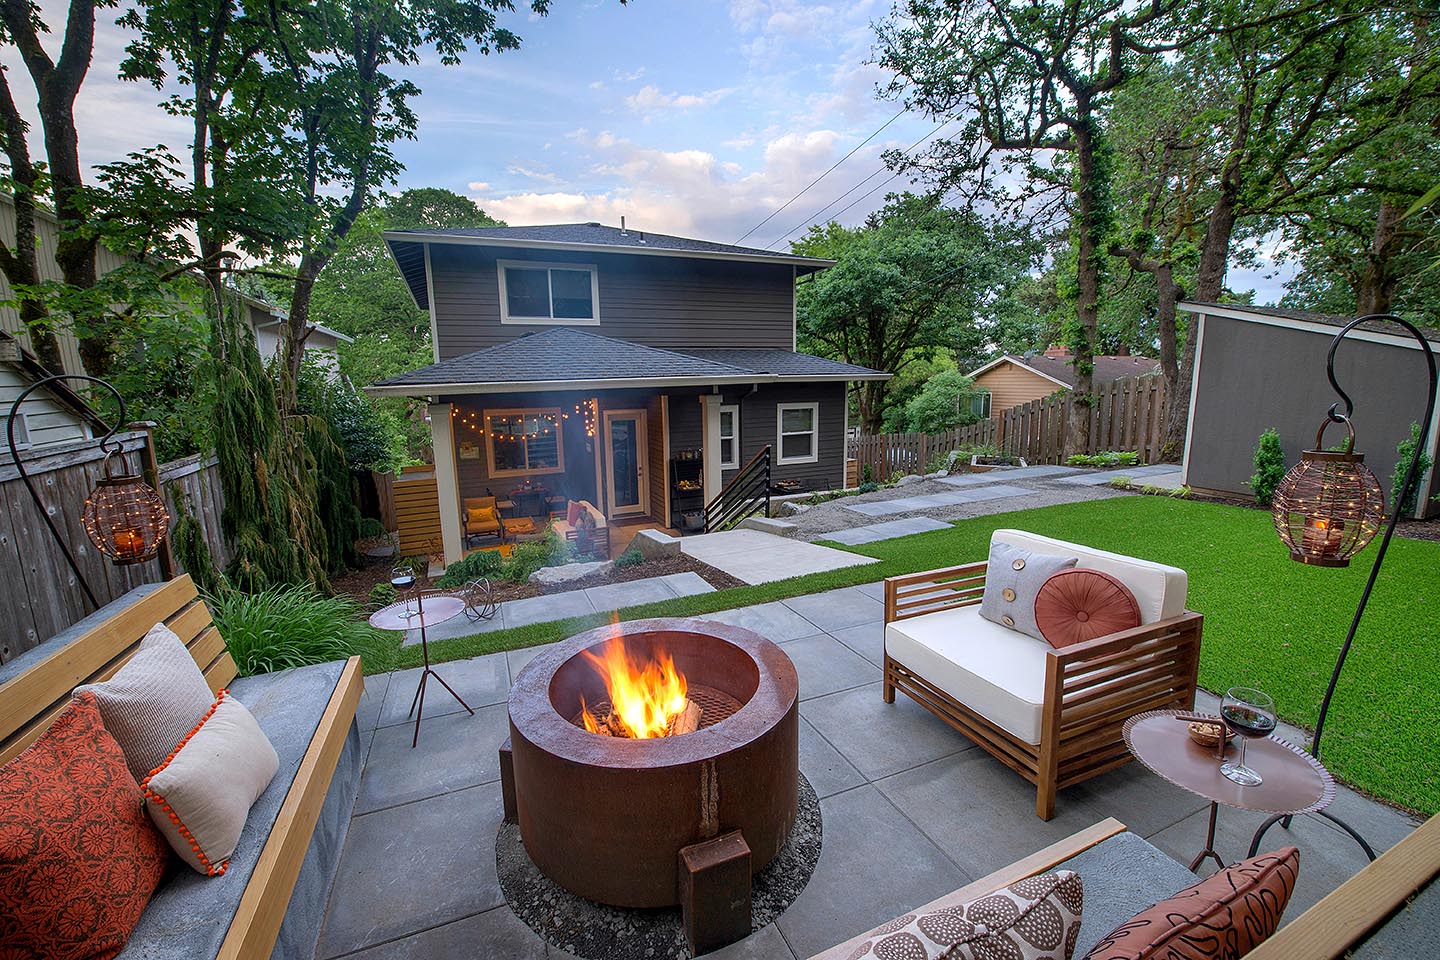 Better Outdoor Living Areas Improve the Value of Home